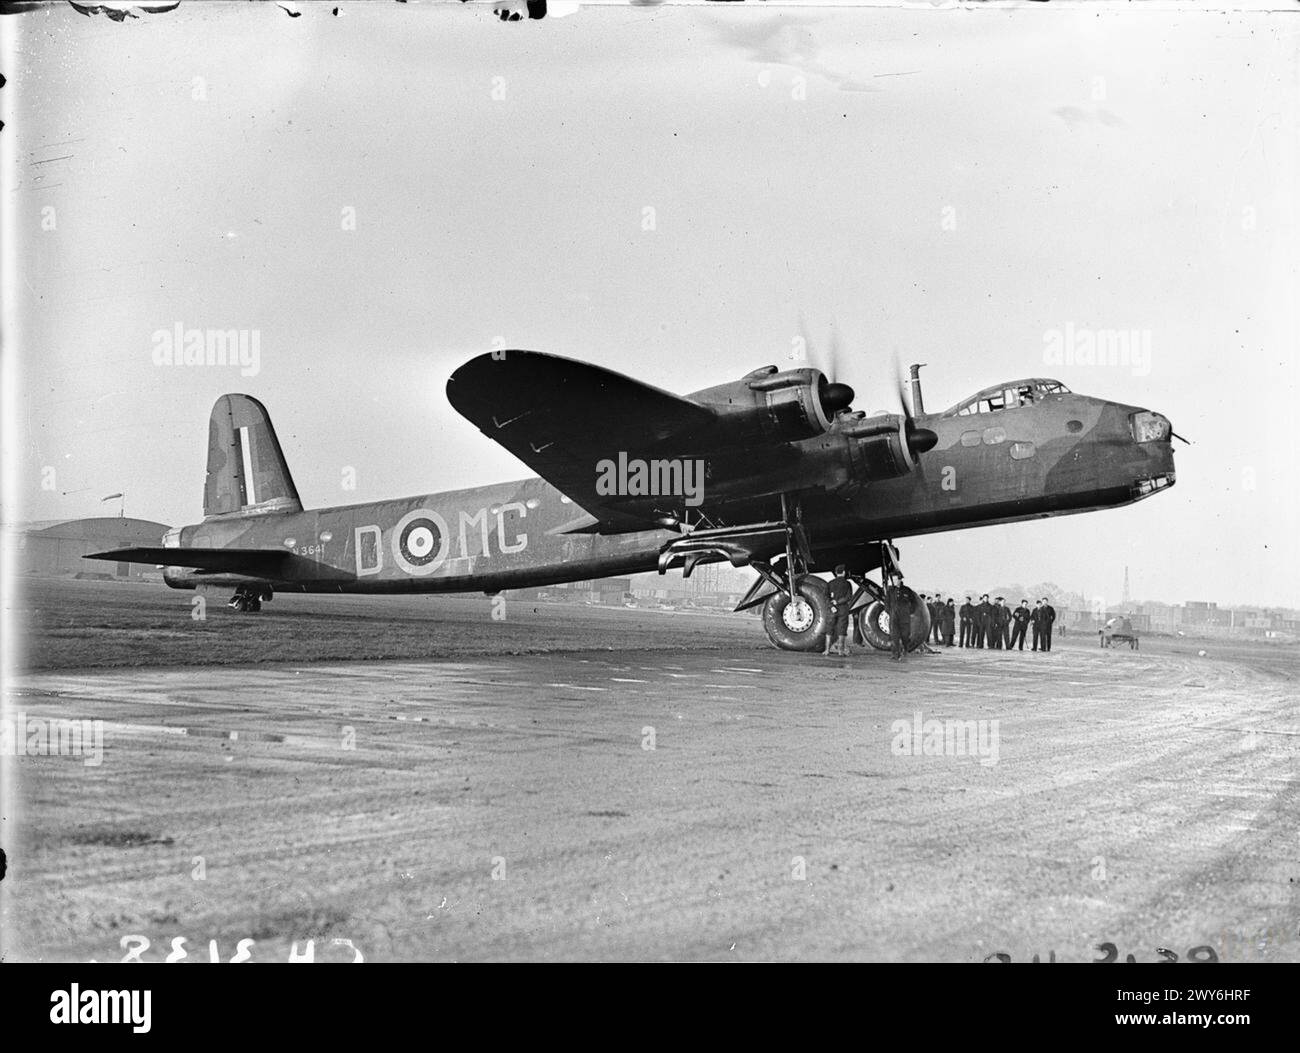 AIRCRAFT OF THE ROYAL AIR FORCE 1939-1945: SHORT S.29 STIRLING. - Stirling Mark I, N3641 MG-D, of No. 7 Squadron RAF, running up its engines on the ground at Oakington, Cambridgeshire. , Royal Air Force, 7 Squadron Stock Photo